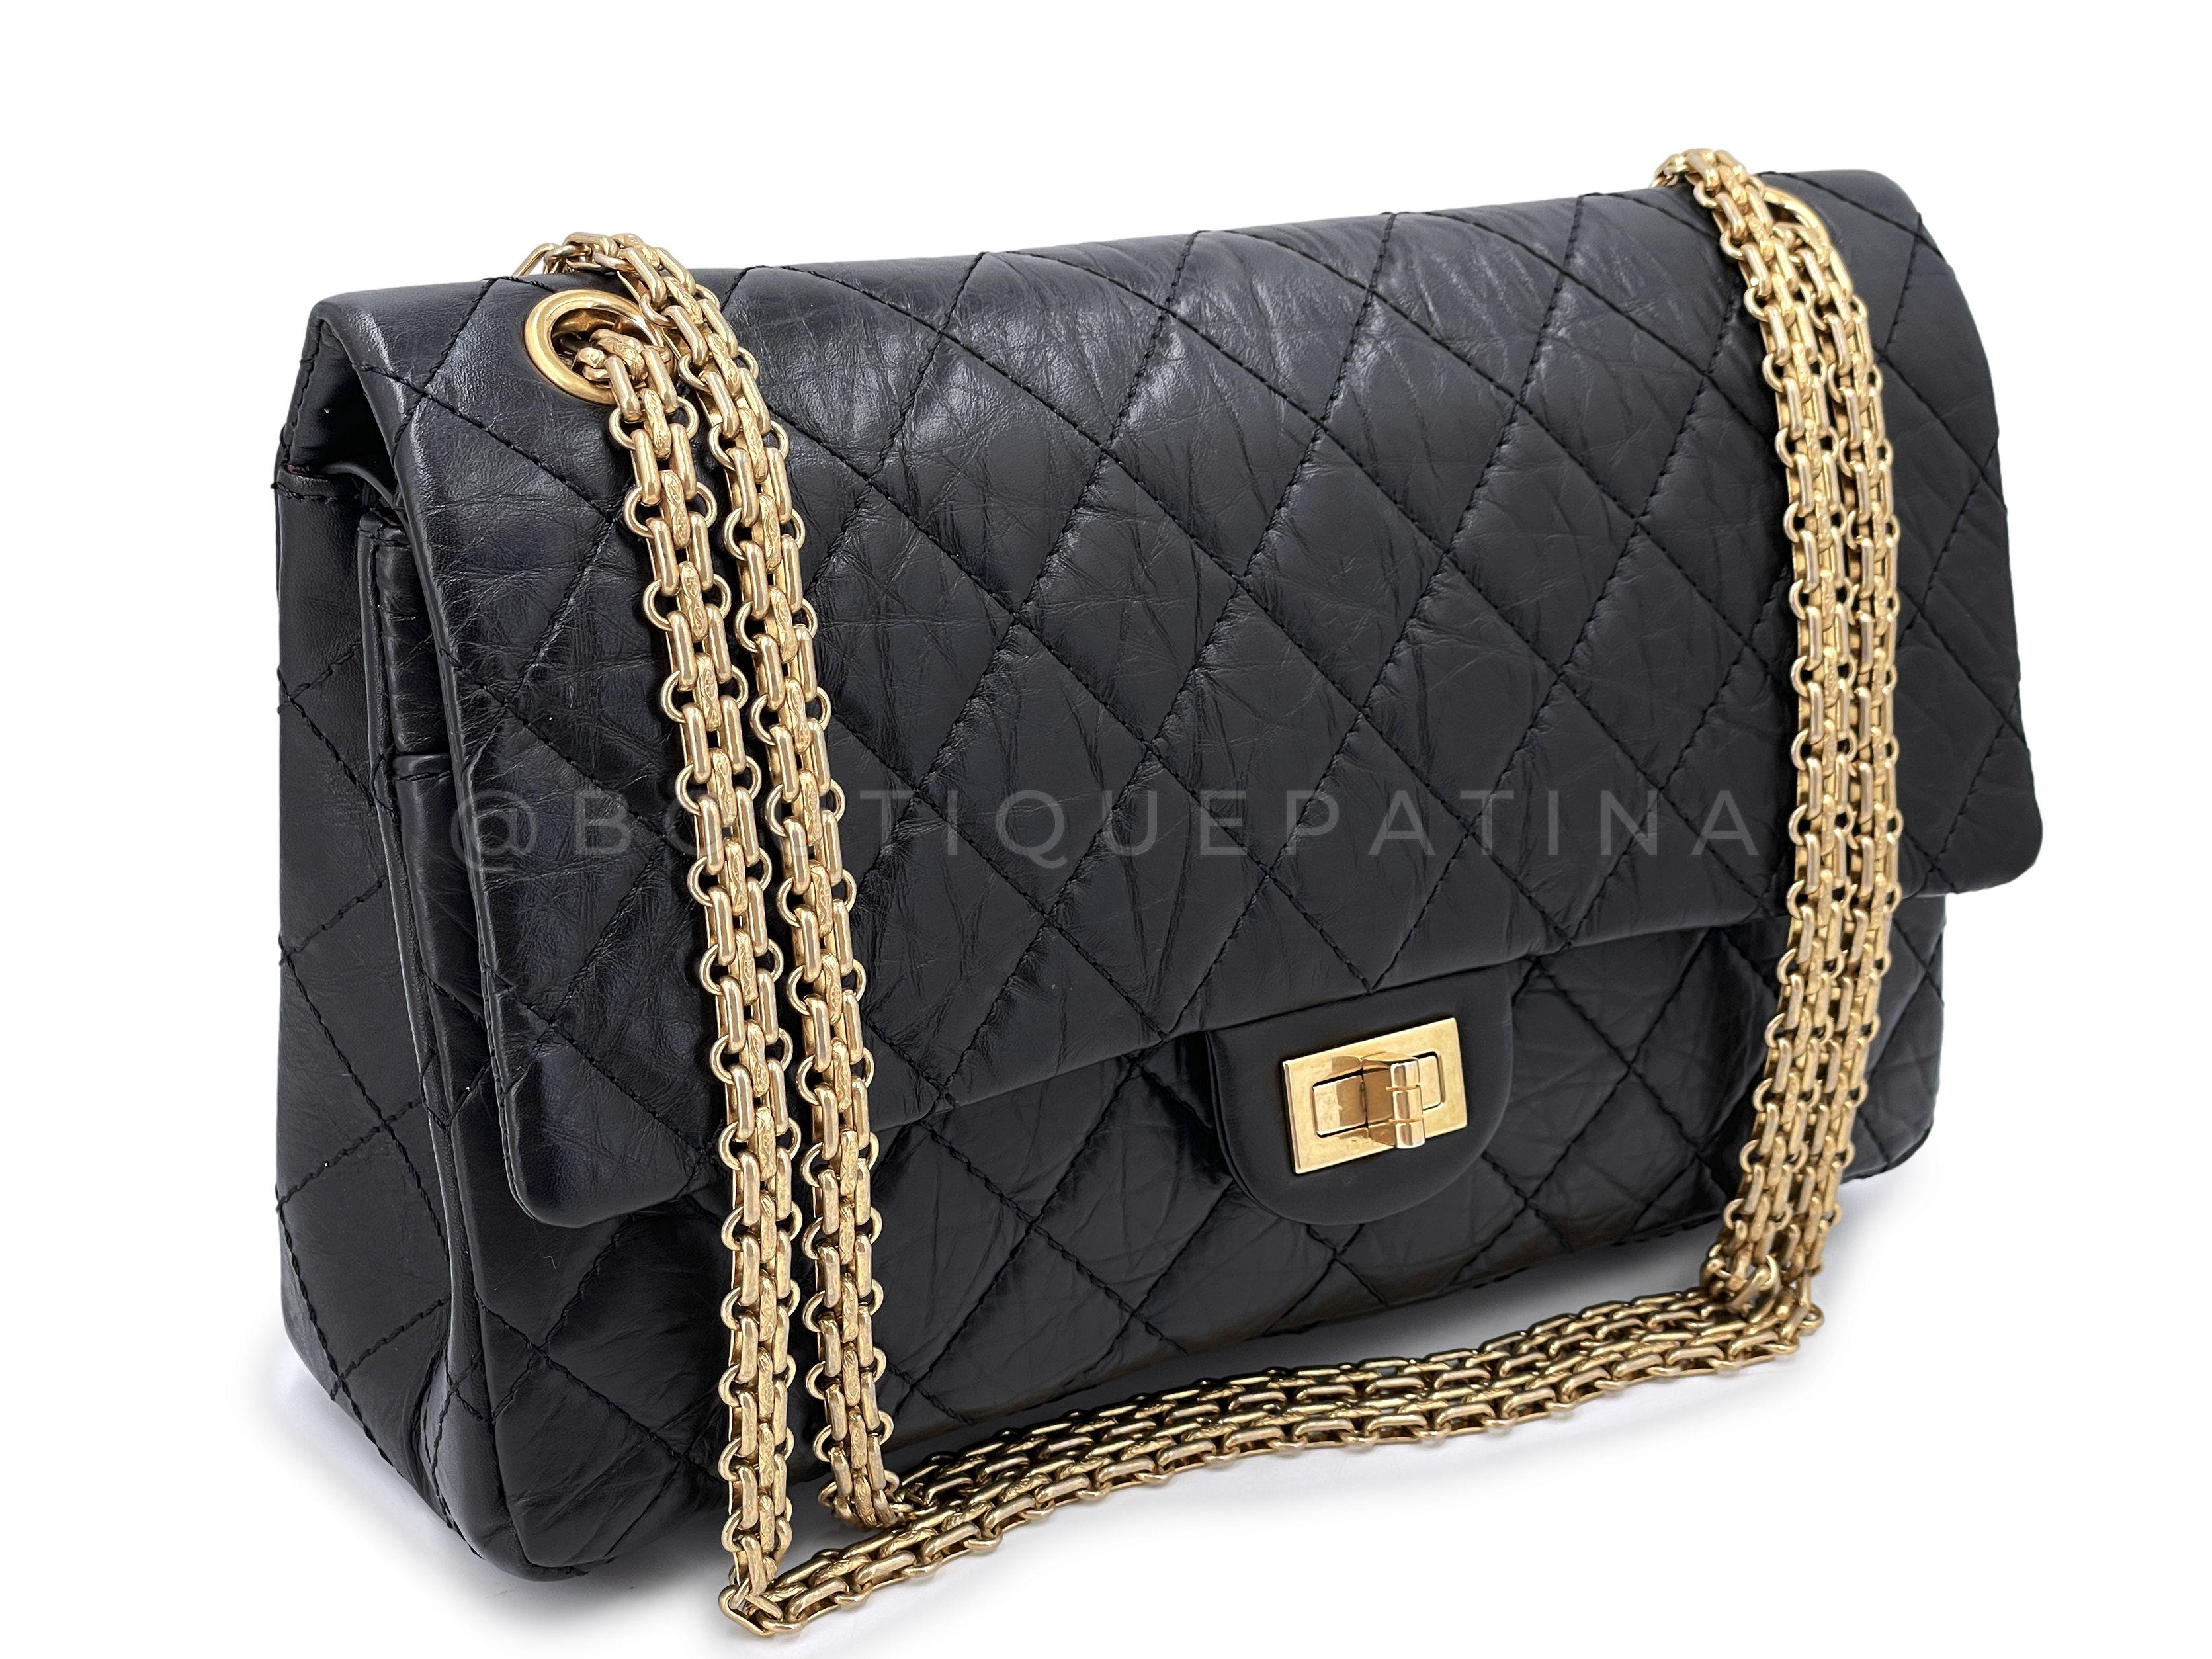 Store item: 66864
The reissue ligne is known and coveted by Chanel lovers as the original Chanel classic model, before the interlocking CC's were released. The rectangular mademoiselle lock, quilted aged calfskin and aged bijoux chain are hallmarks